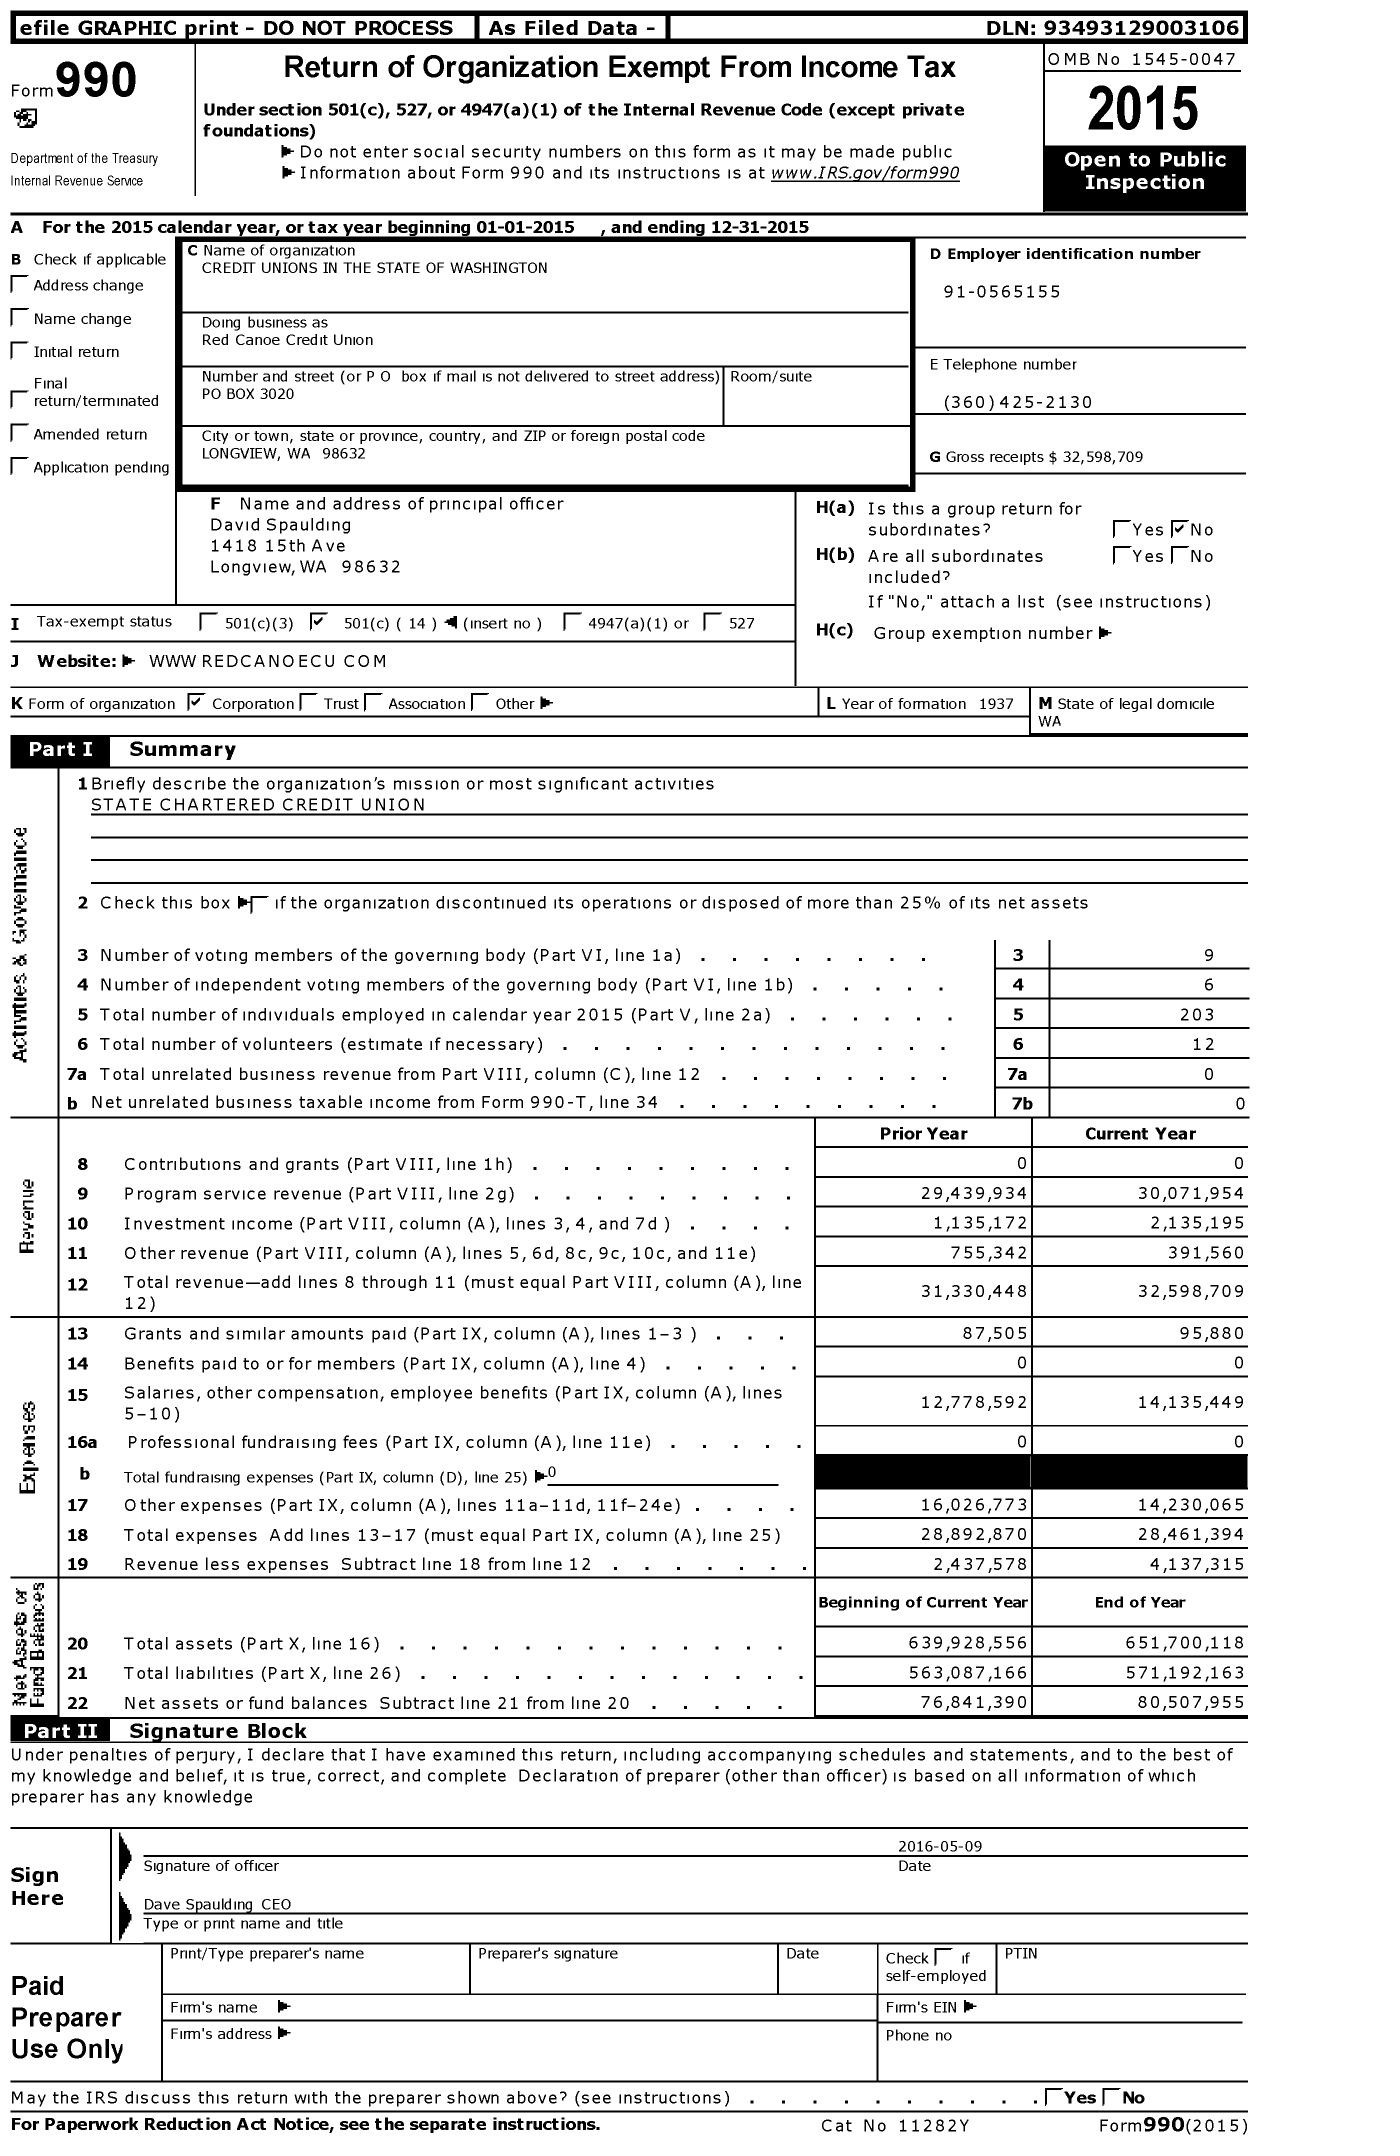 Image of first page of 2015 Form 990O for Red Canoe Credit Union / Credit Unions in the State of Washington